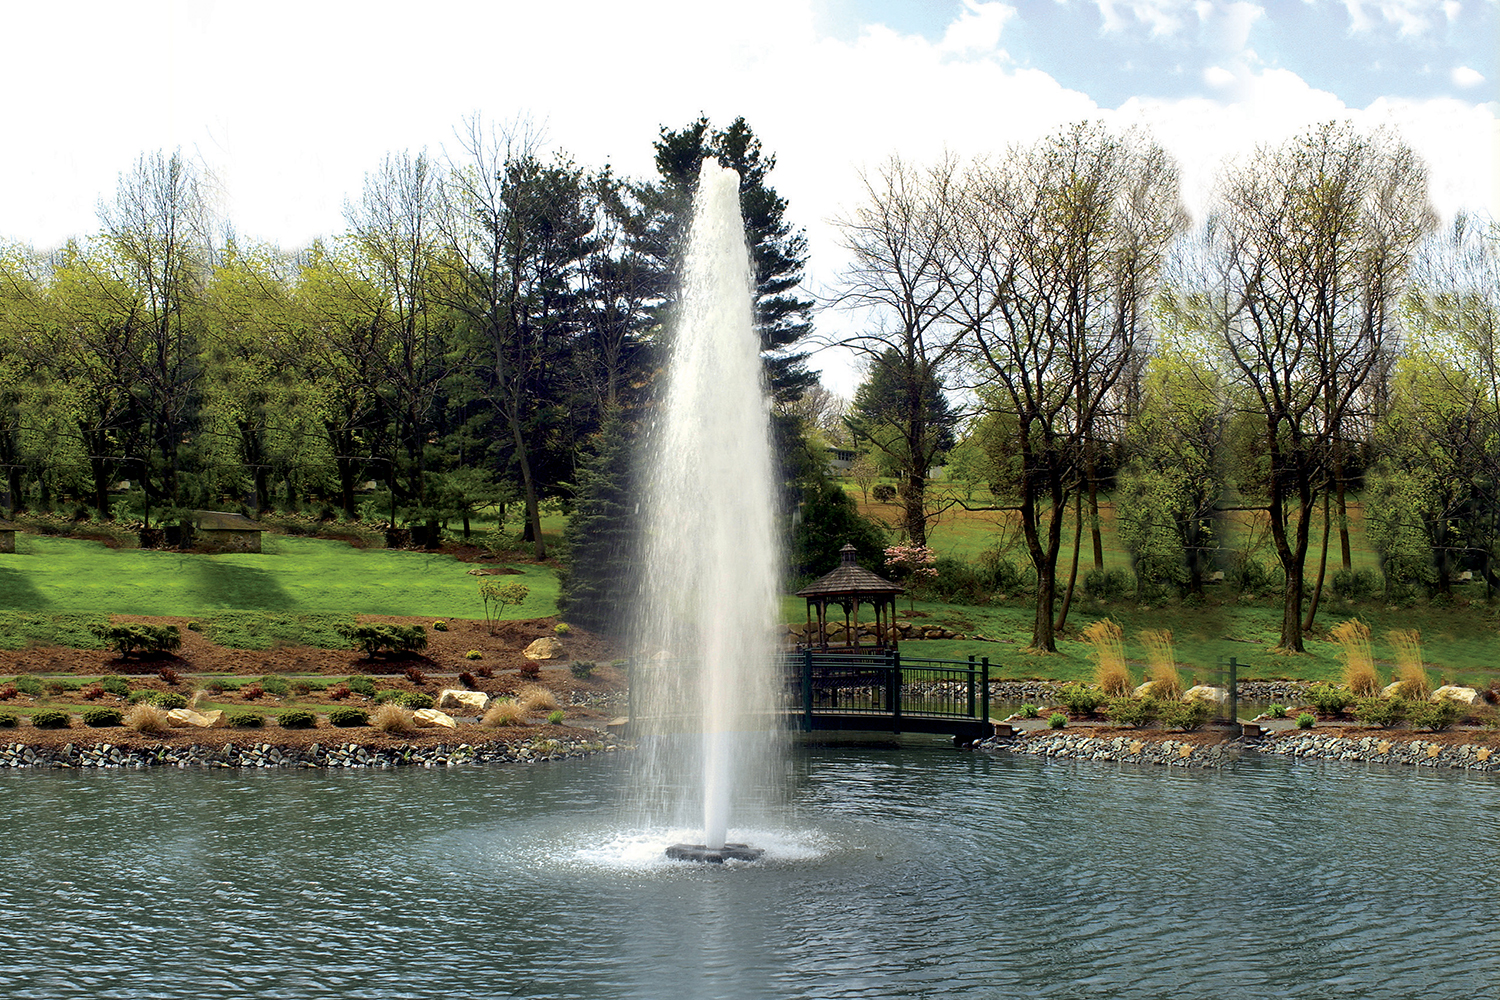 One of Otterbine's Comet Aerating Fountains in a park